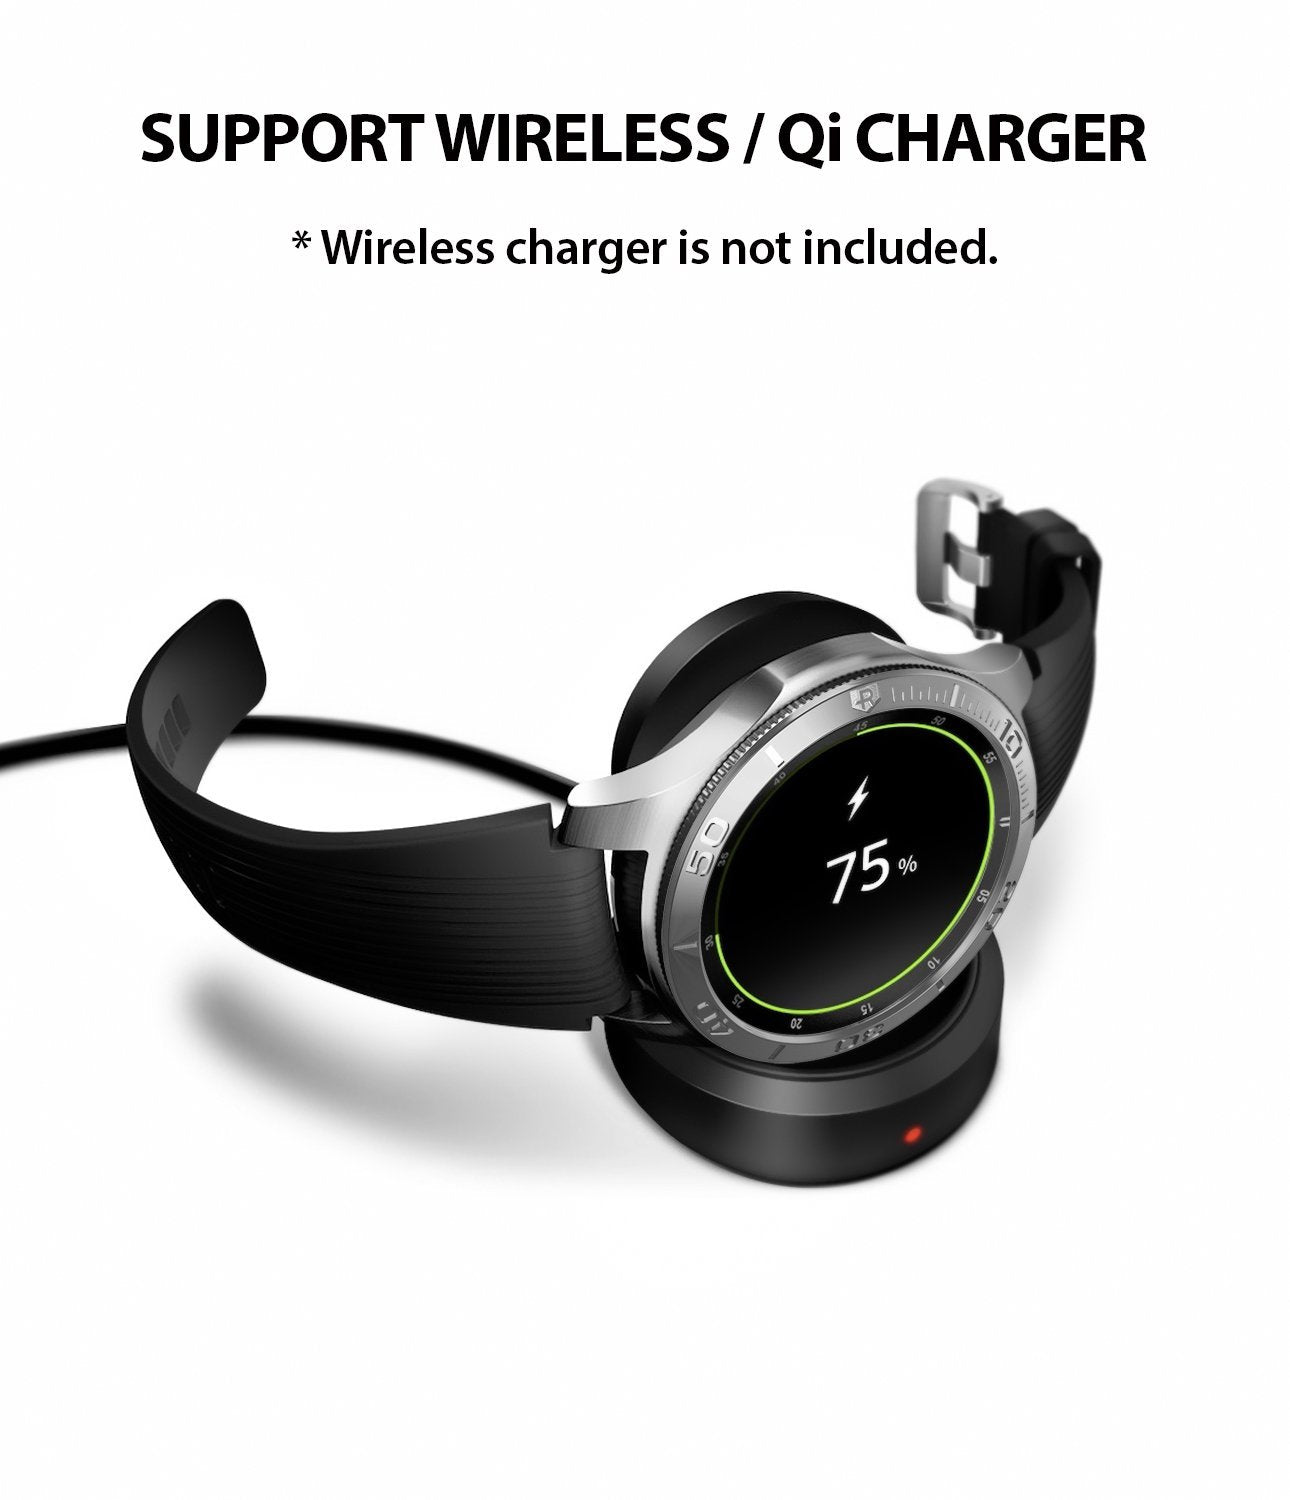 ringke bezel styling supporting wireless, qi charging with the case on